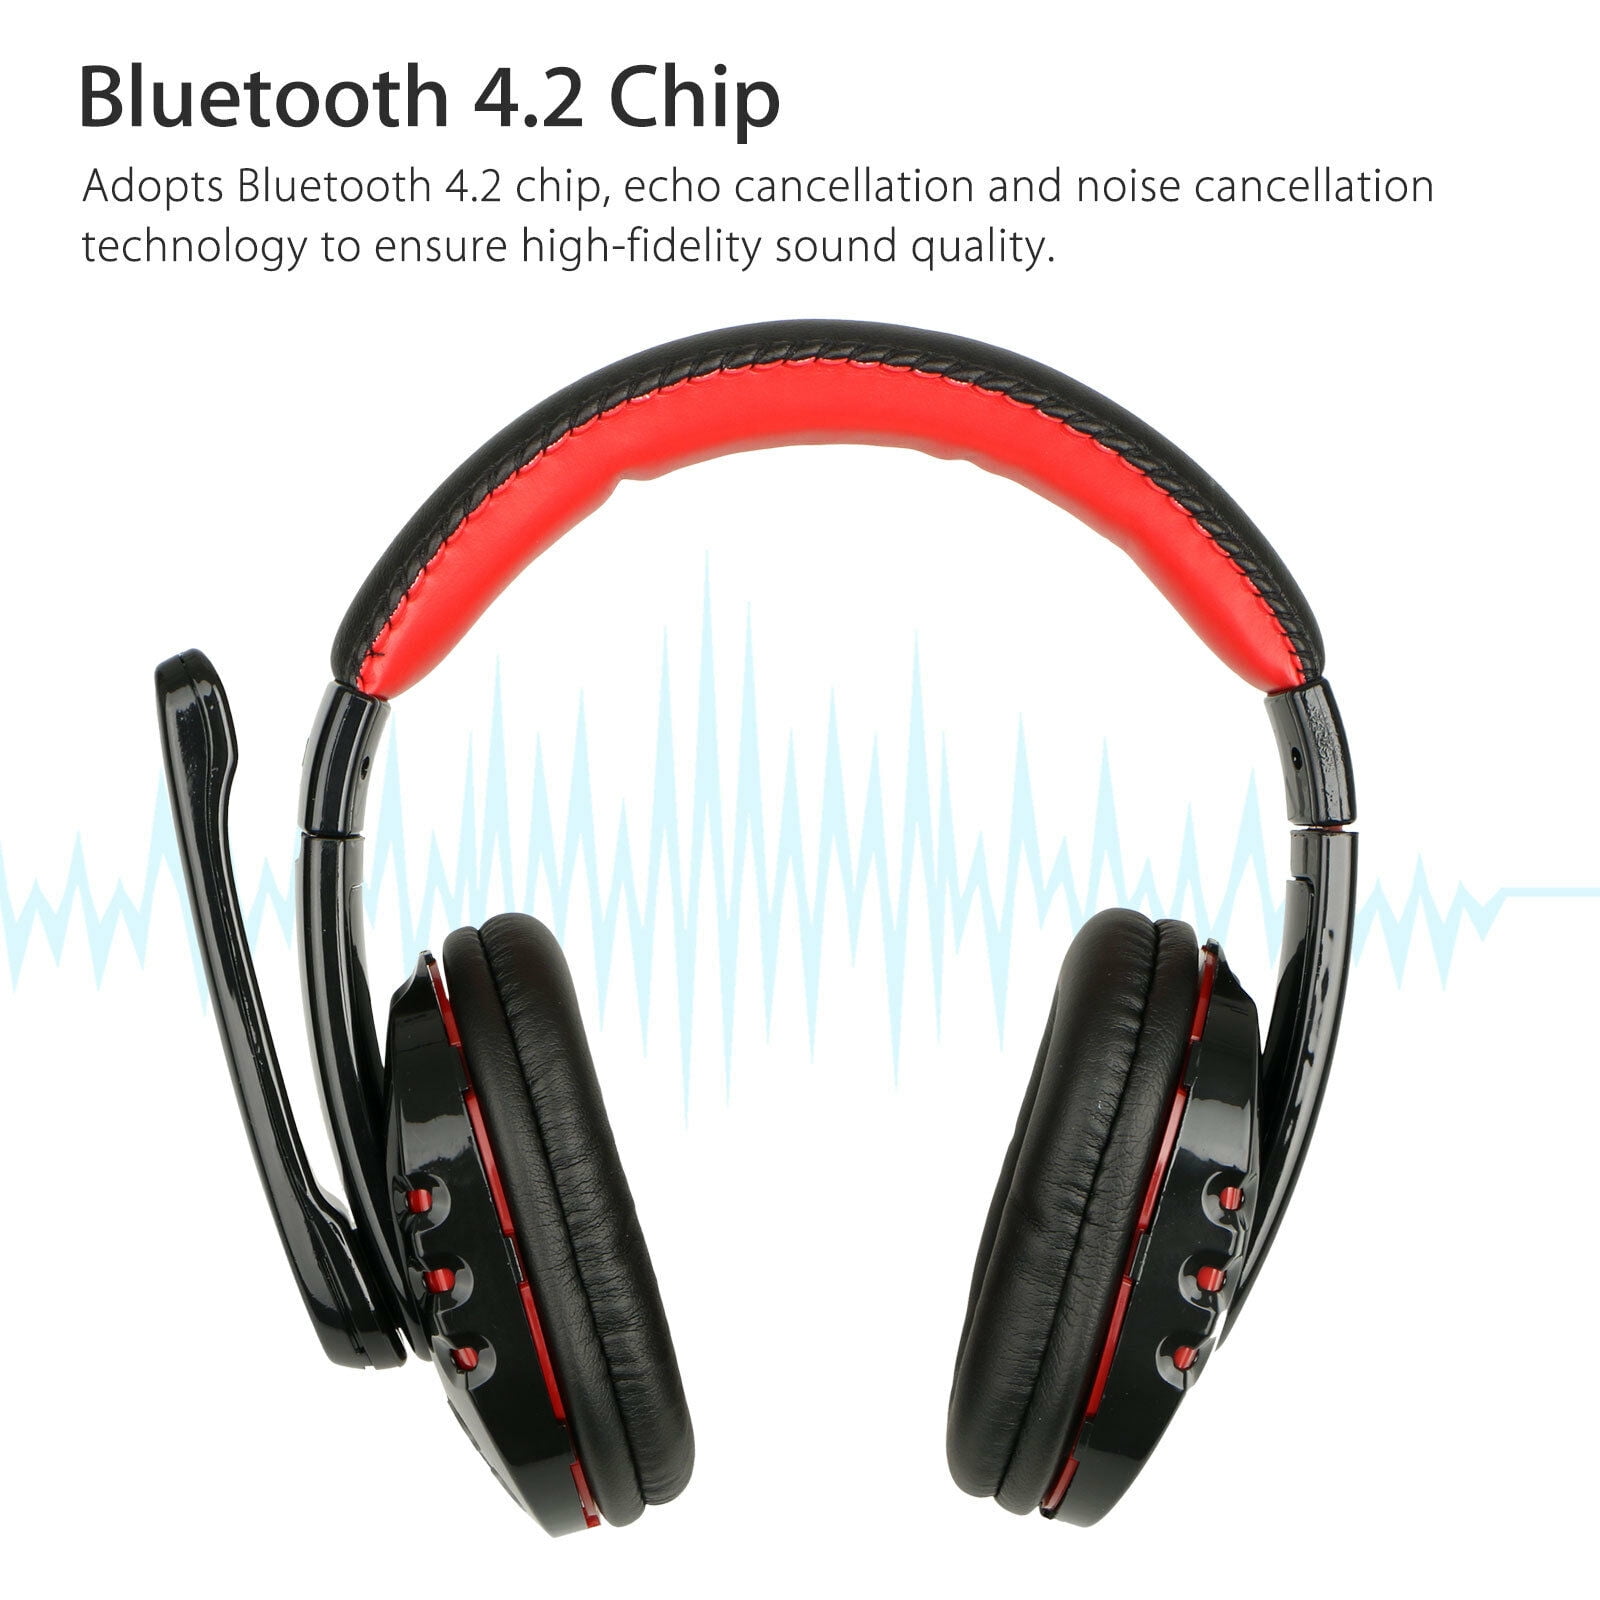 Bluetooth Wireless Gaming Headset for Xbox PC PS4 with Mic LED Control - Walmart.com